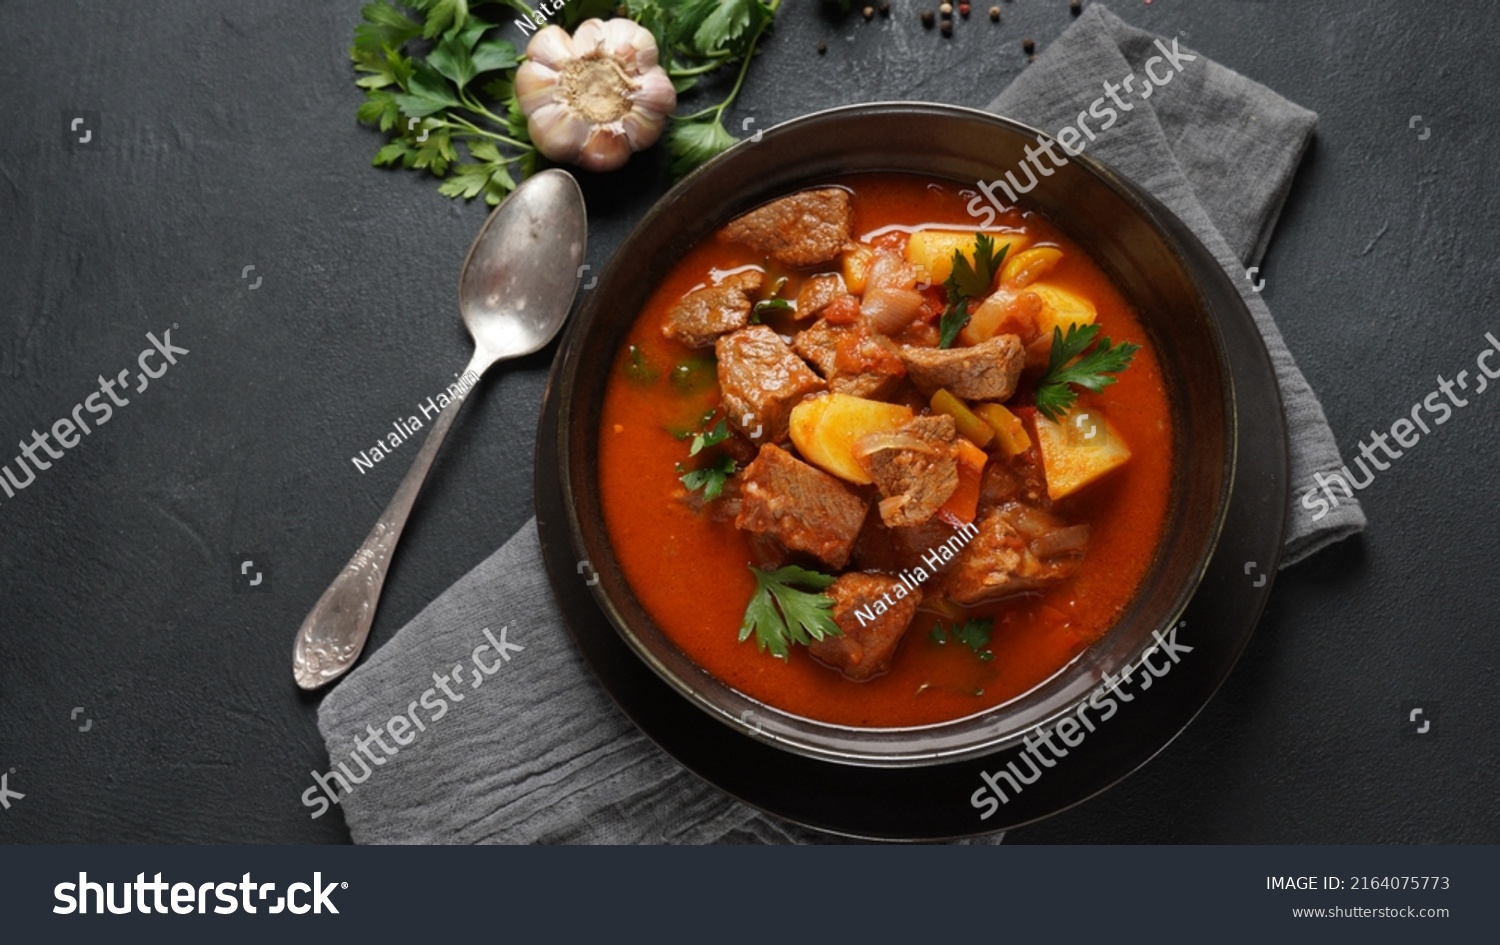 Beef goulash, soup and a stew, made of beef chuck steak, potatoes and plenty of paprika. Hungarian  traditional meal. #2164075773